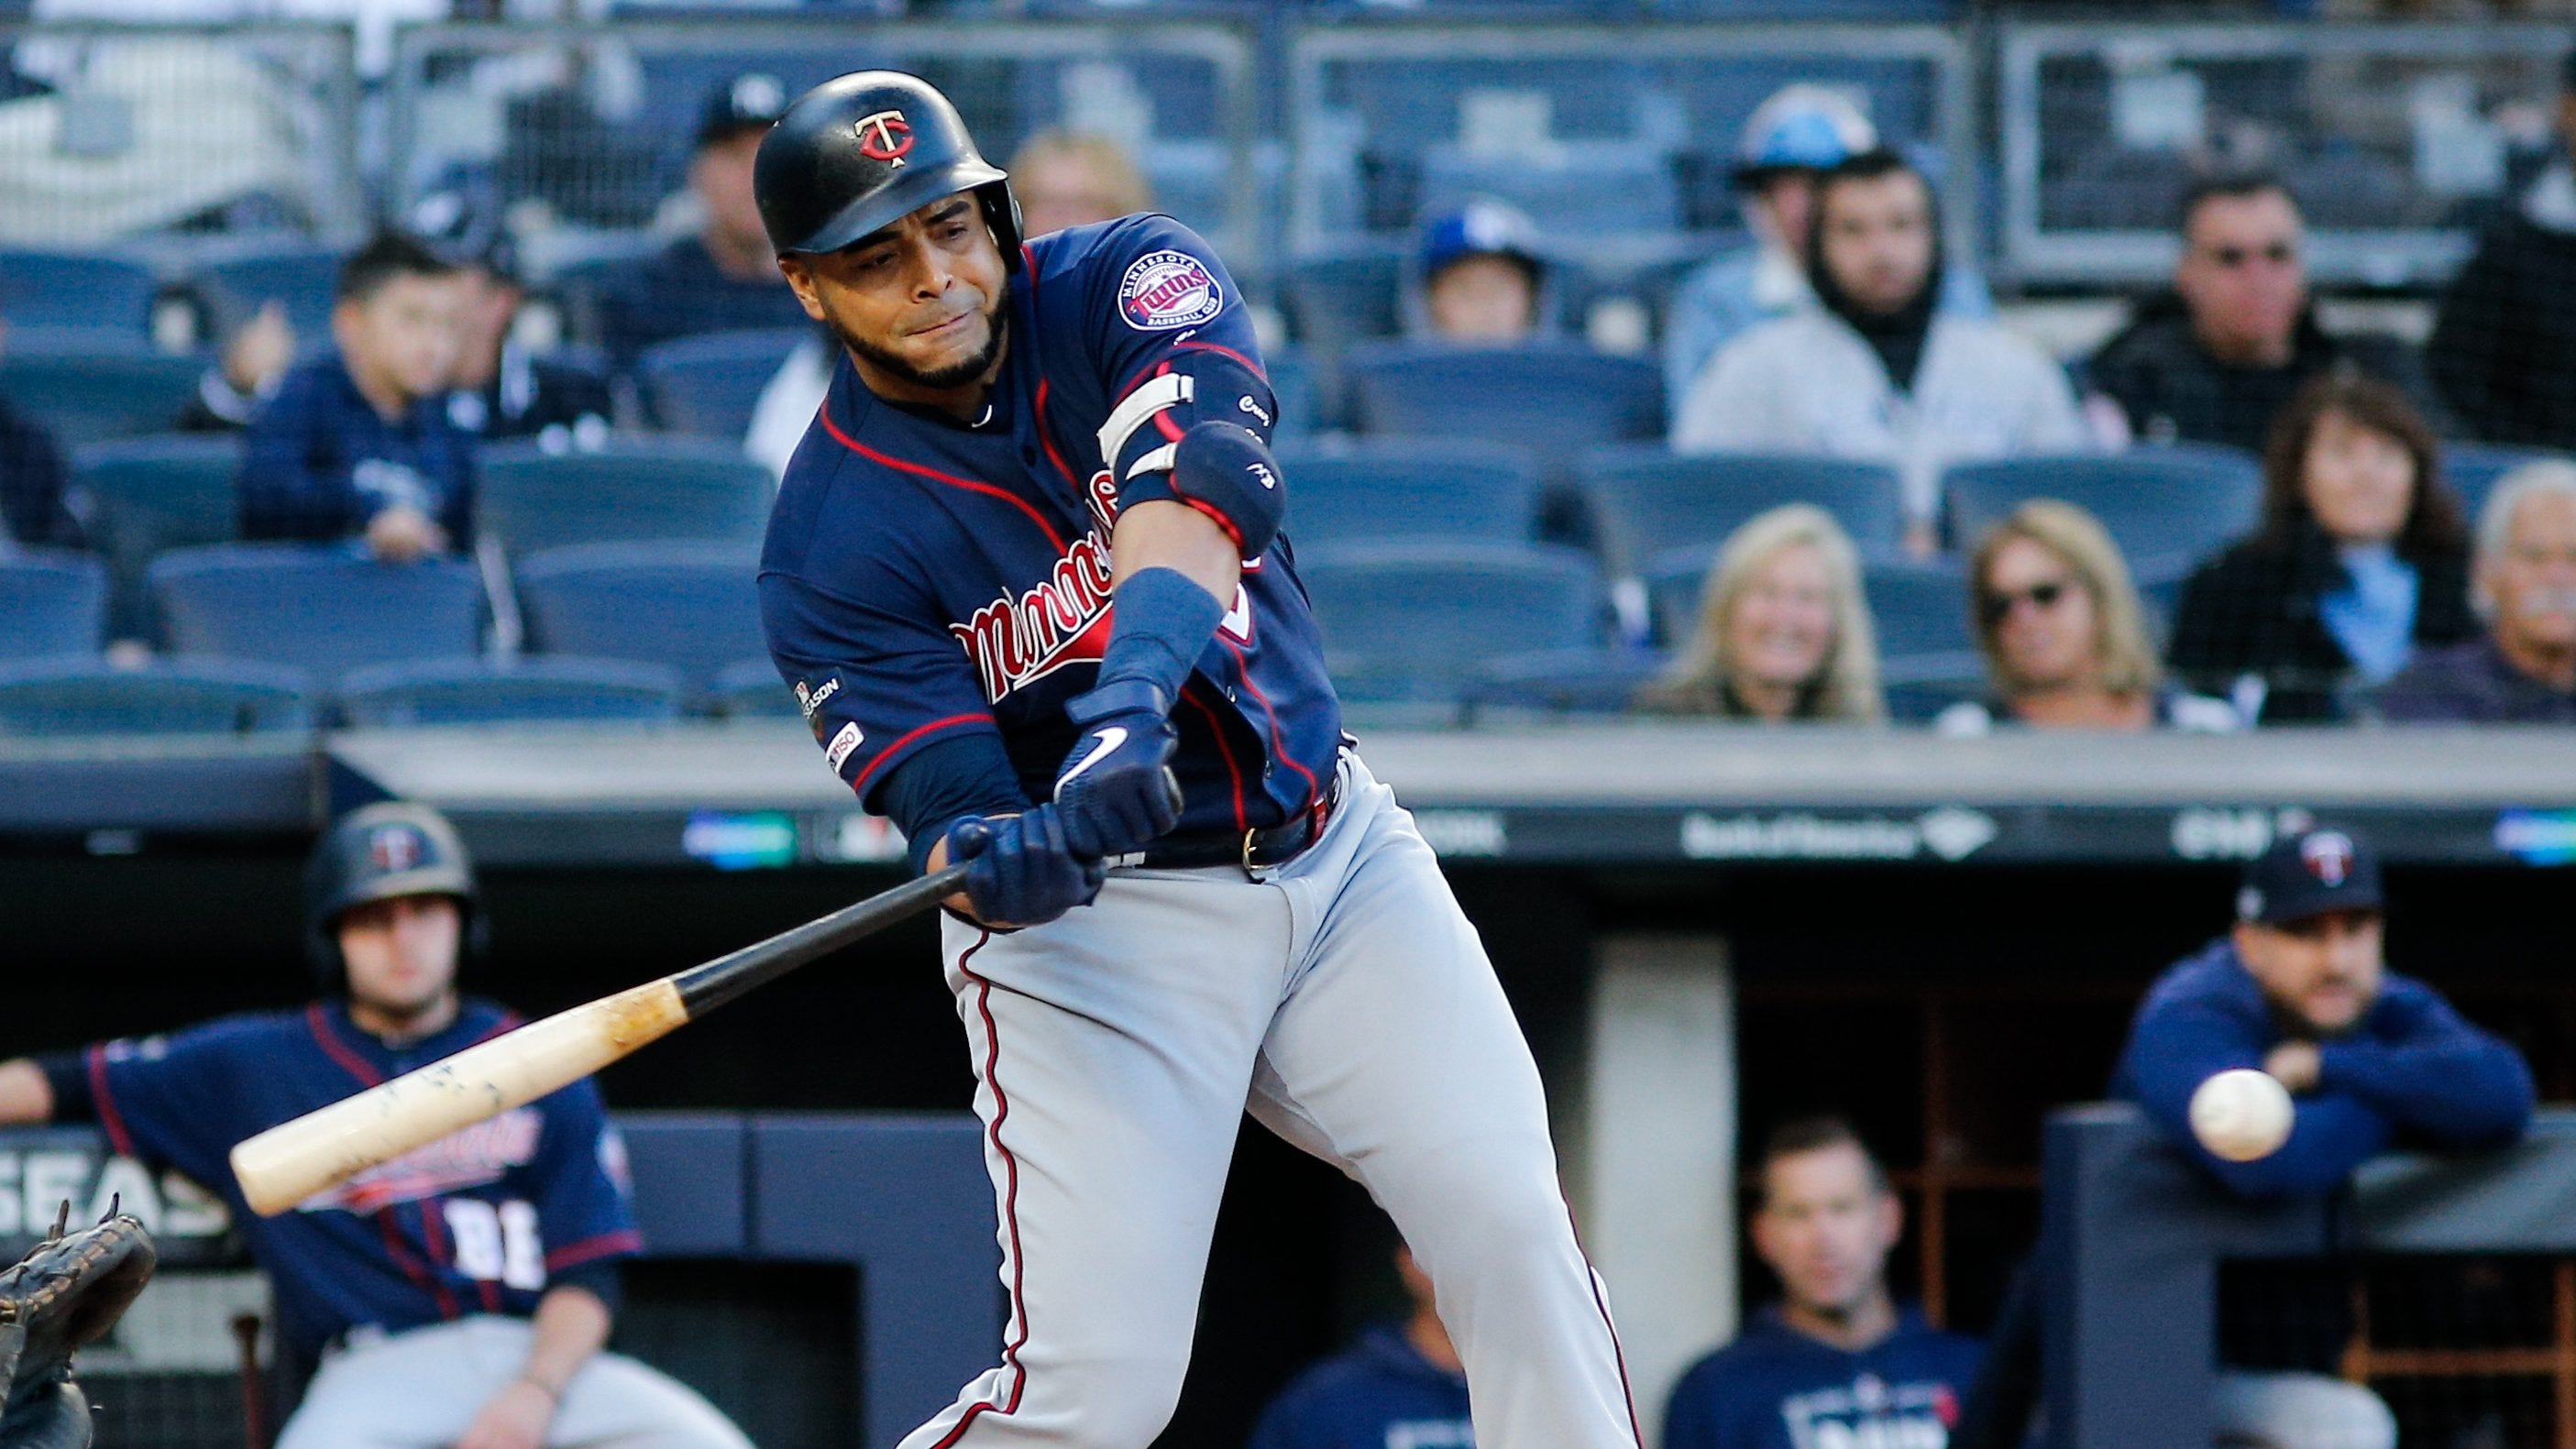 How many games will the Minnesota Twins win in 2020?